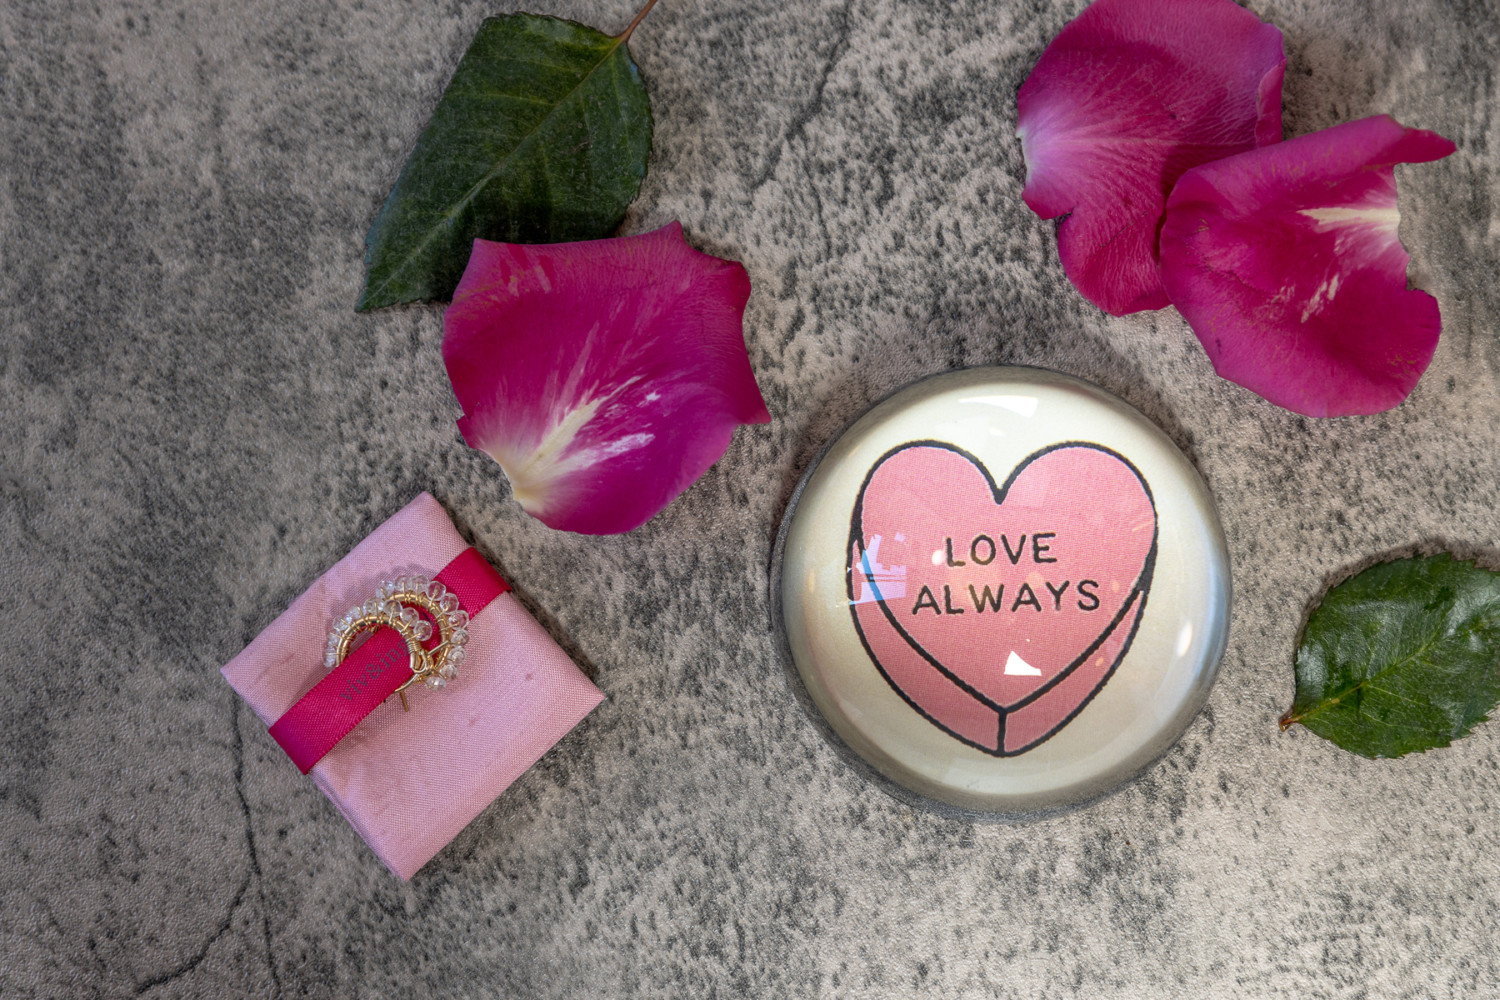 A Love Always dome with rose petals and leaves.